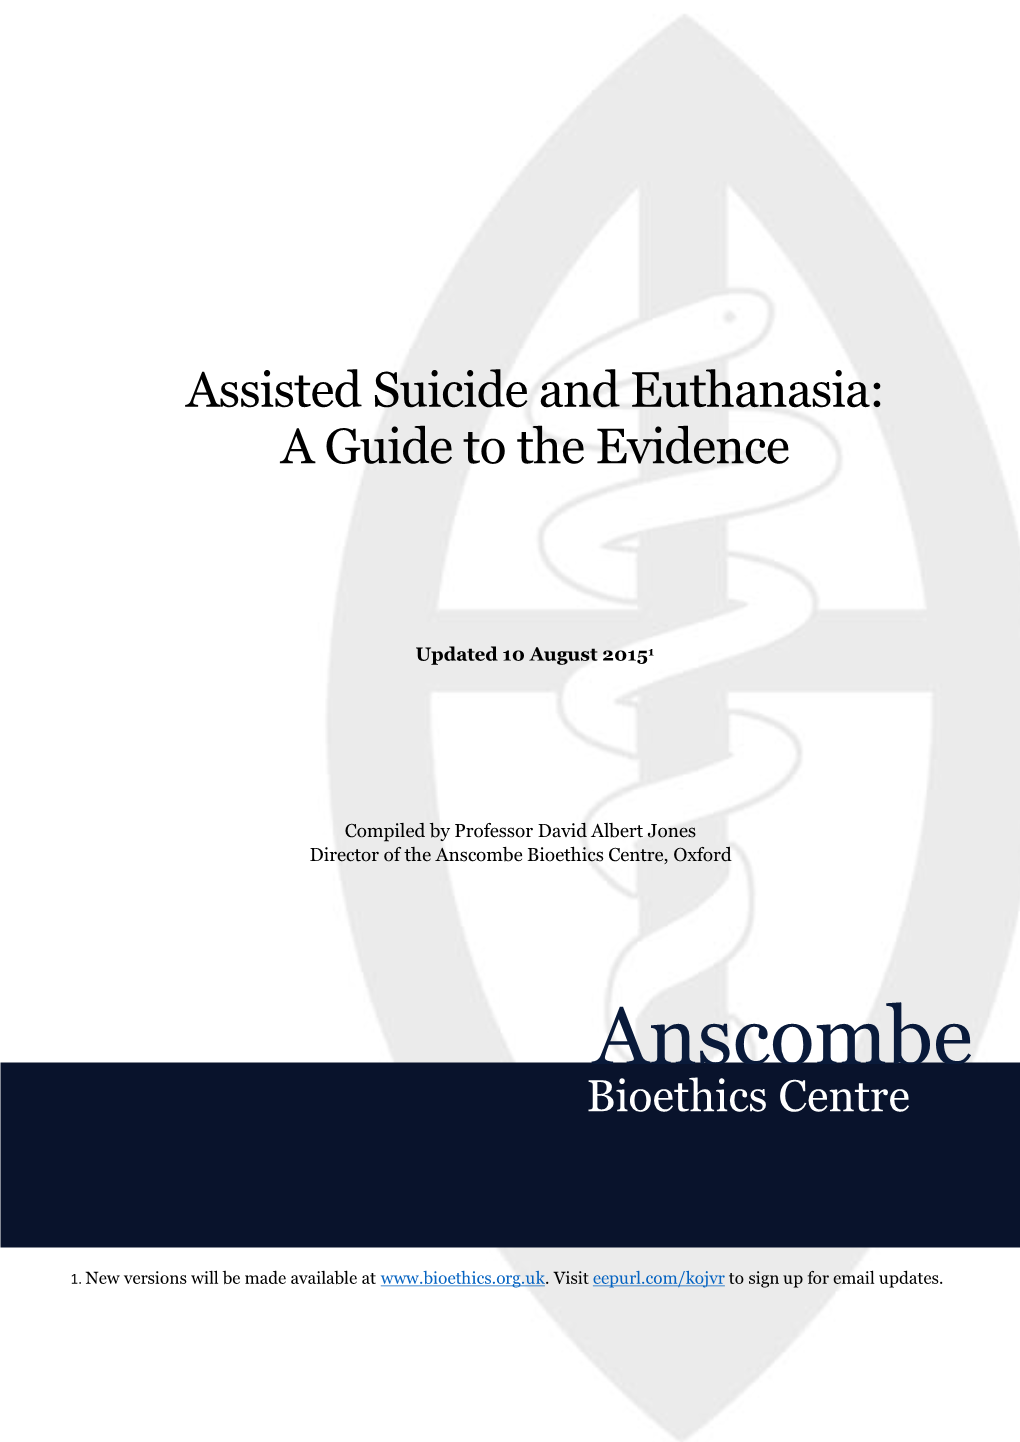 Assisted Suicide and Euthanasia: a Guide to the Evidence